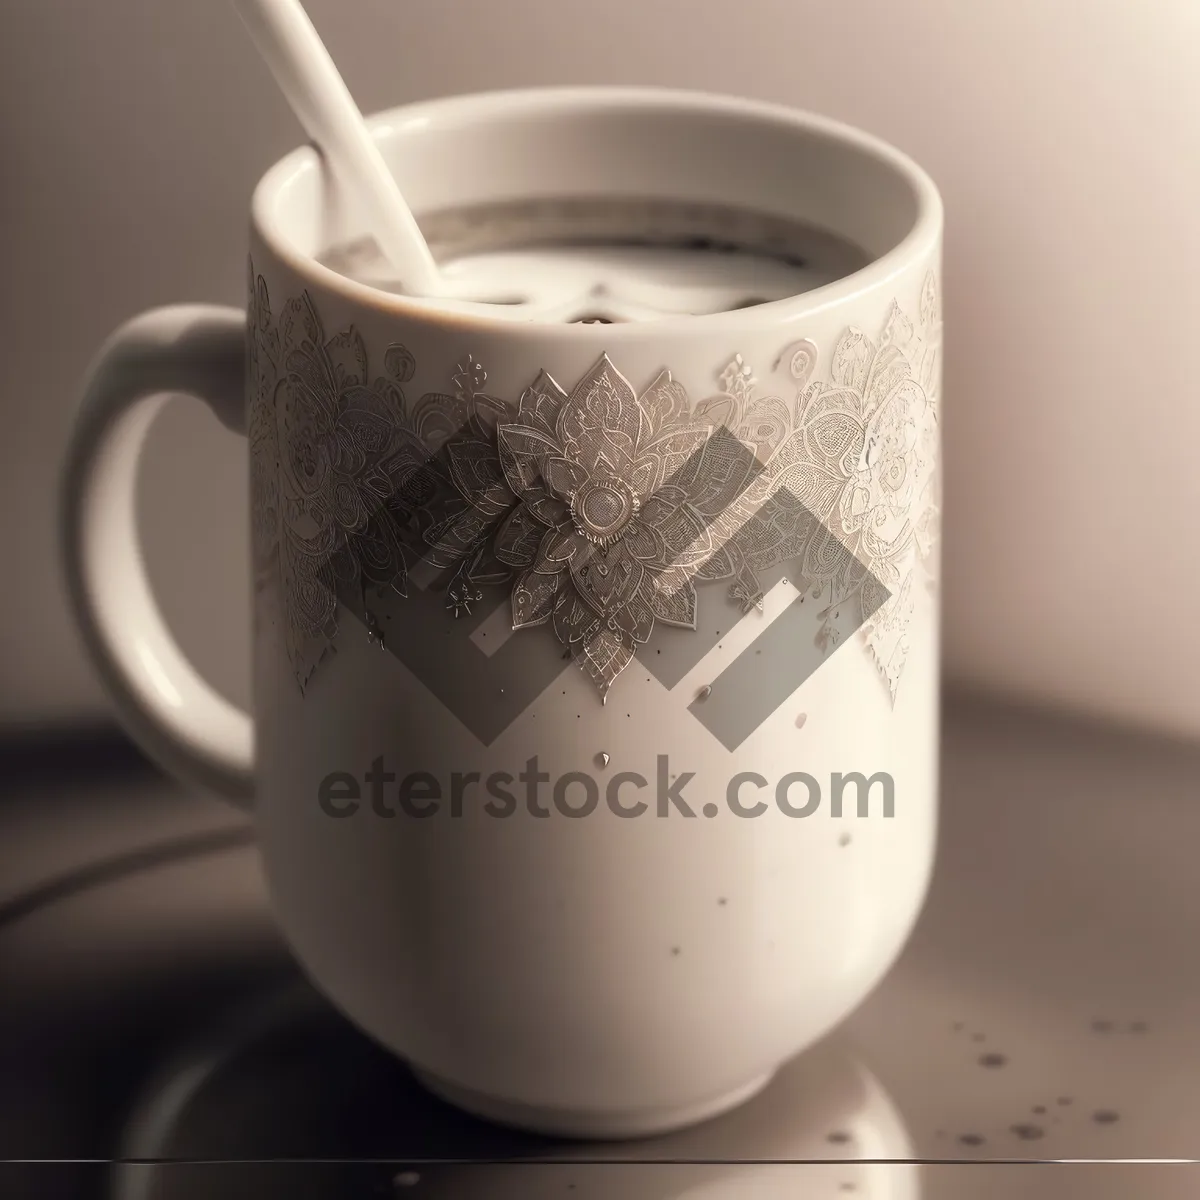 Picture of Hot morning coffee in brown mug on wooden table